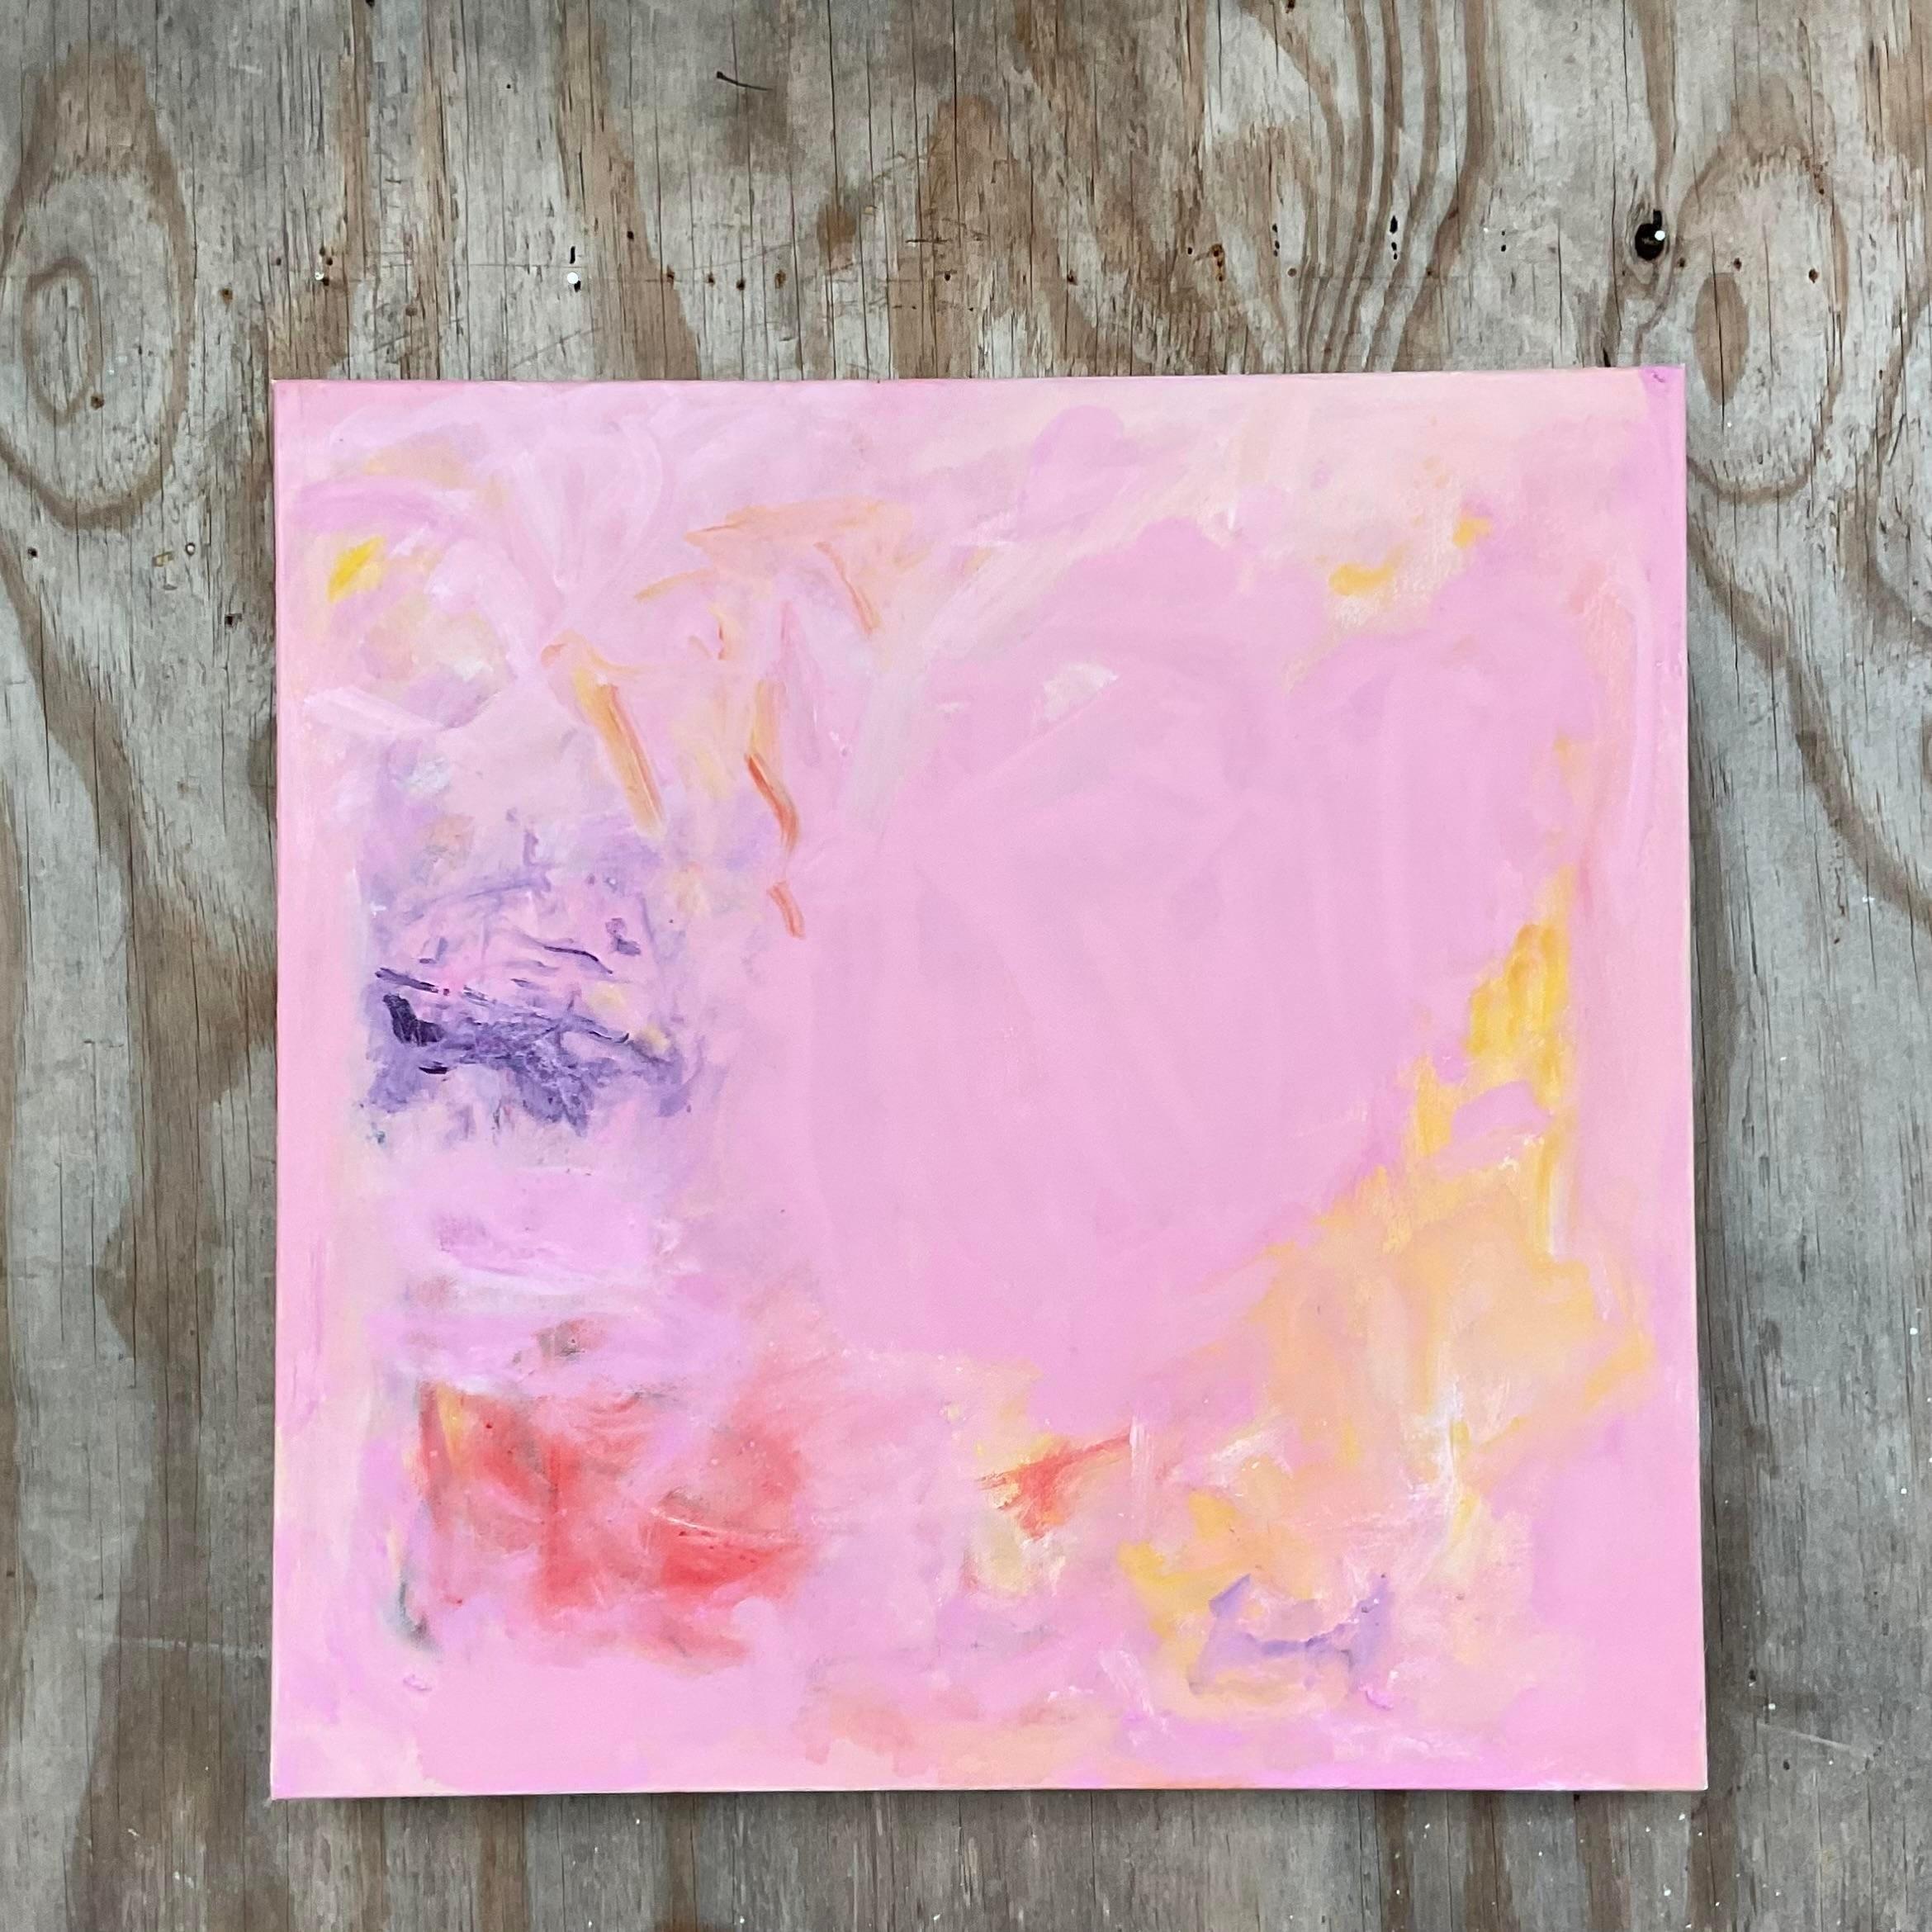 A fabulous vintage Boho original oil on canvas. A chic Abstract composition in brilliant clear colors. Titled “Cherry Blossom” and signed by the artist Schwartz. Acquired from a Palm Beach estate.